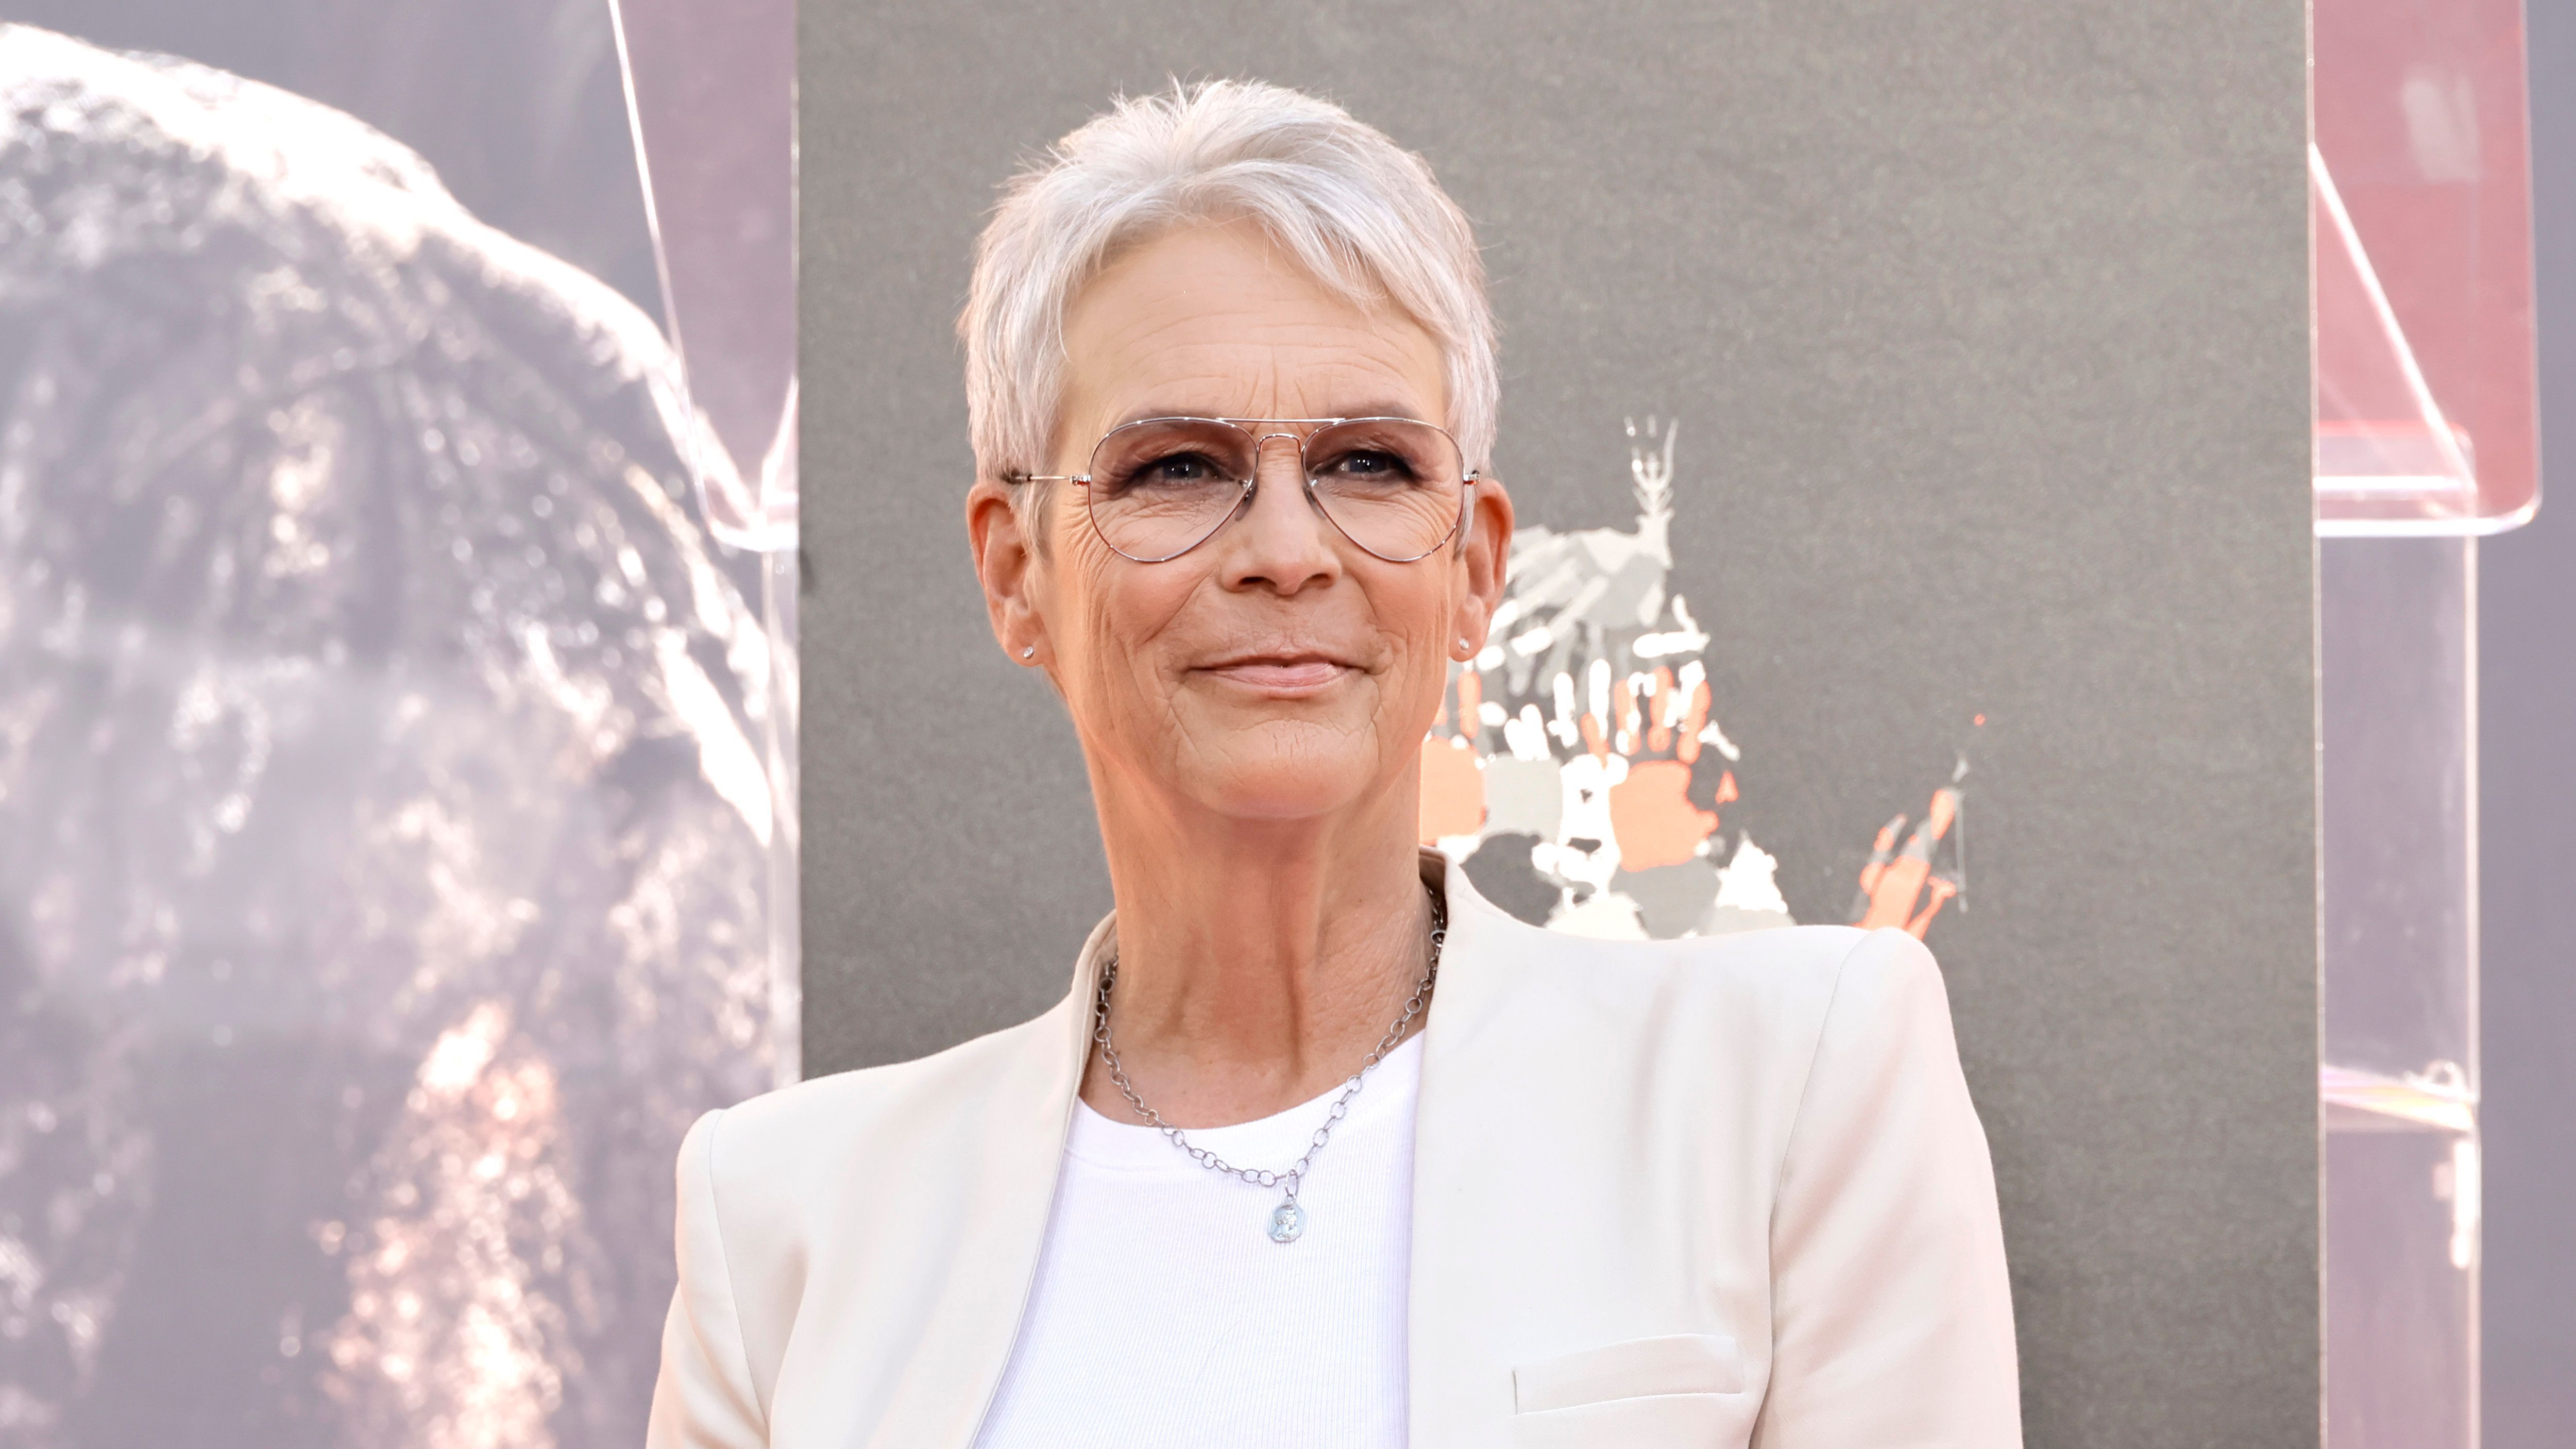 david argenti recommends jamie lee curtis nide pic